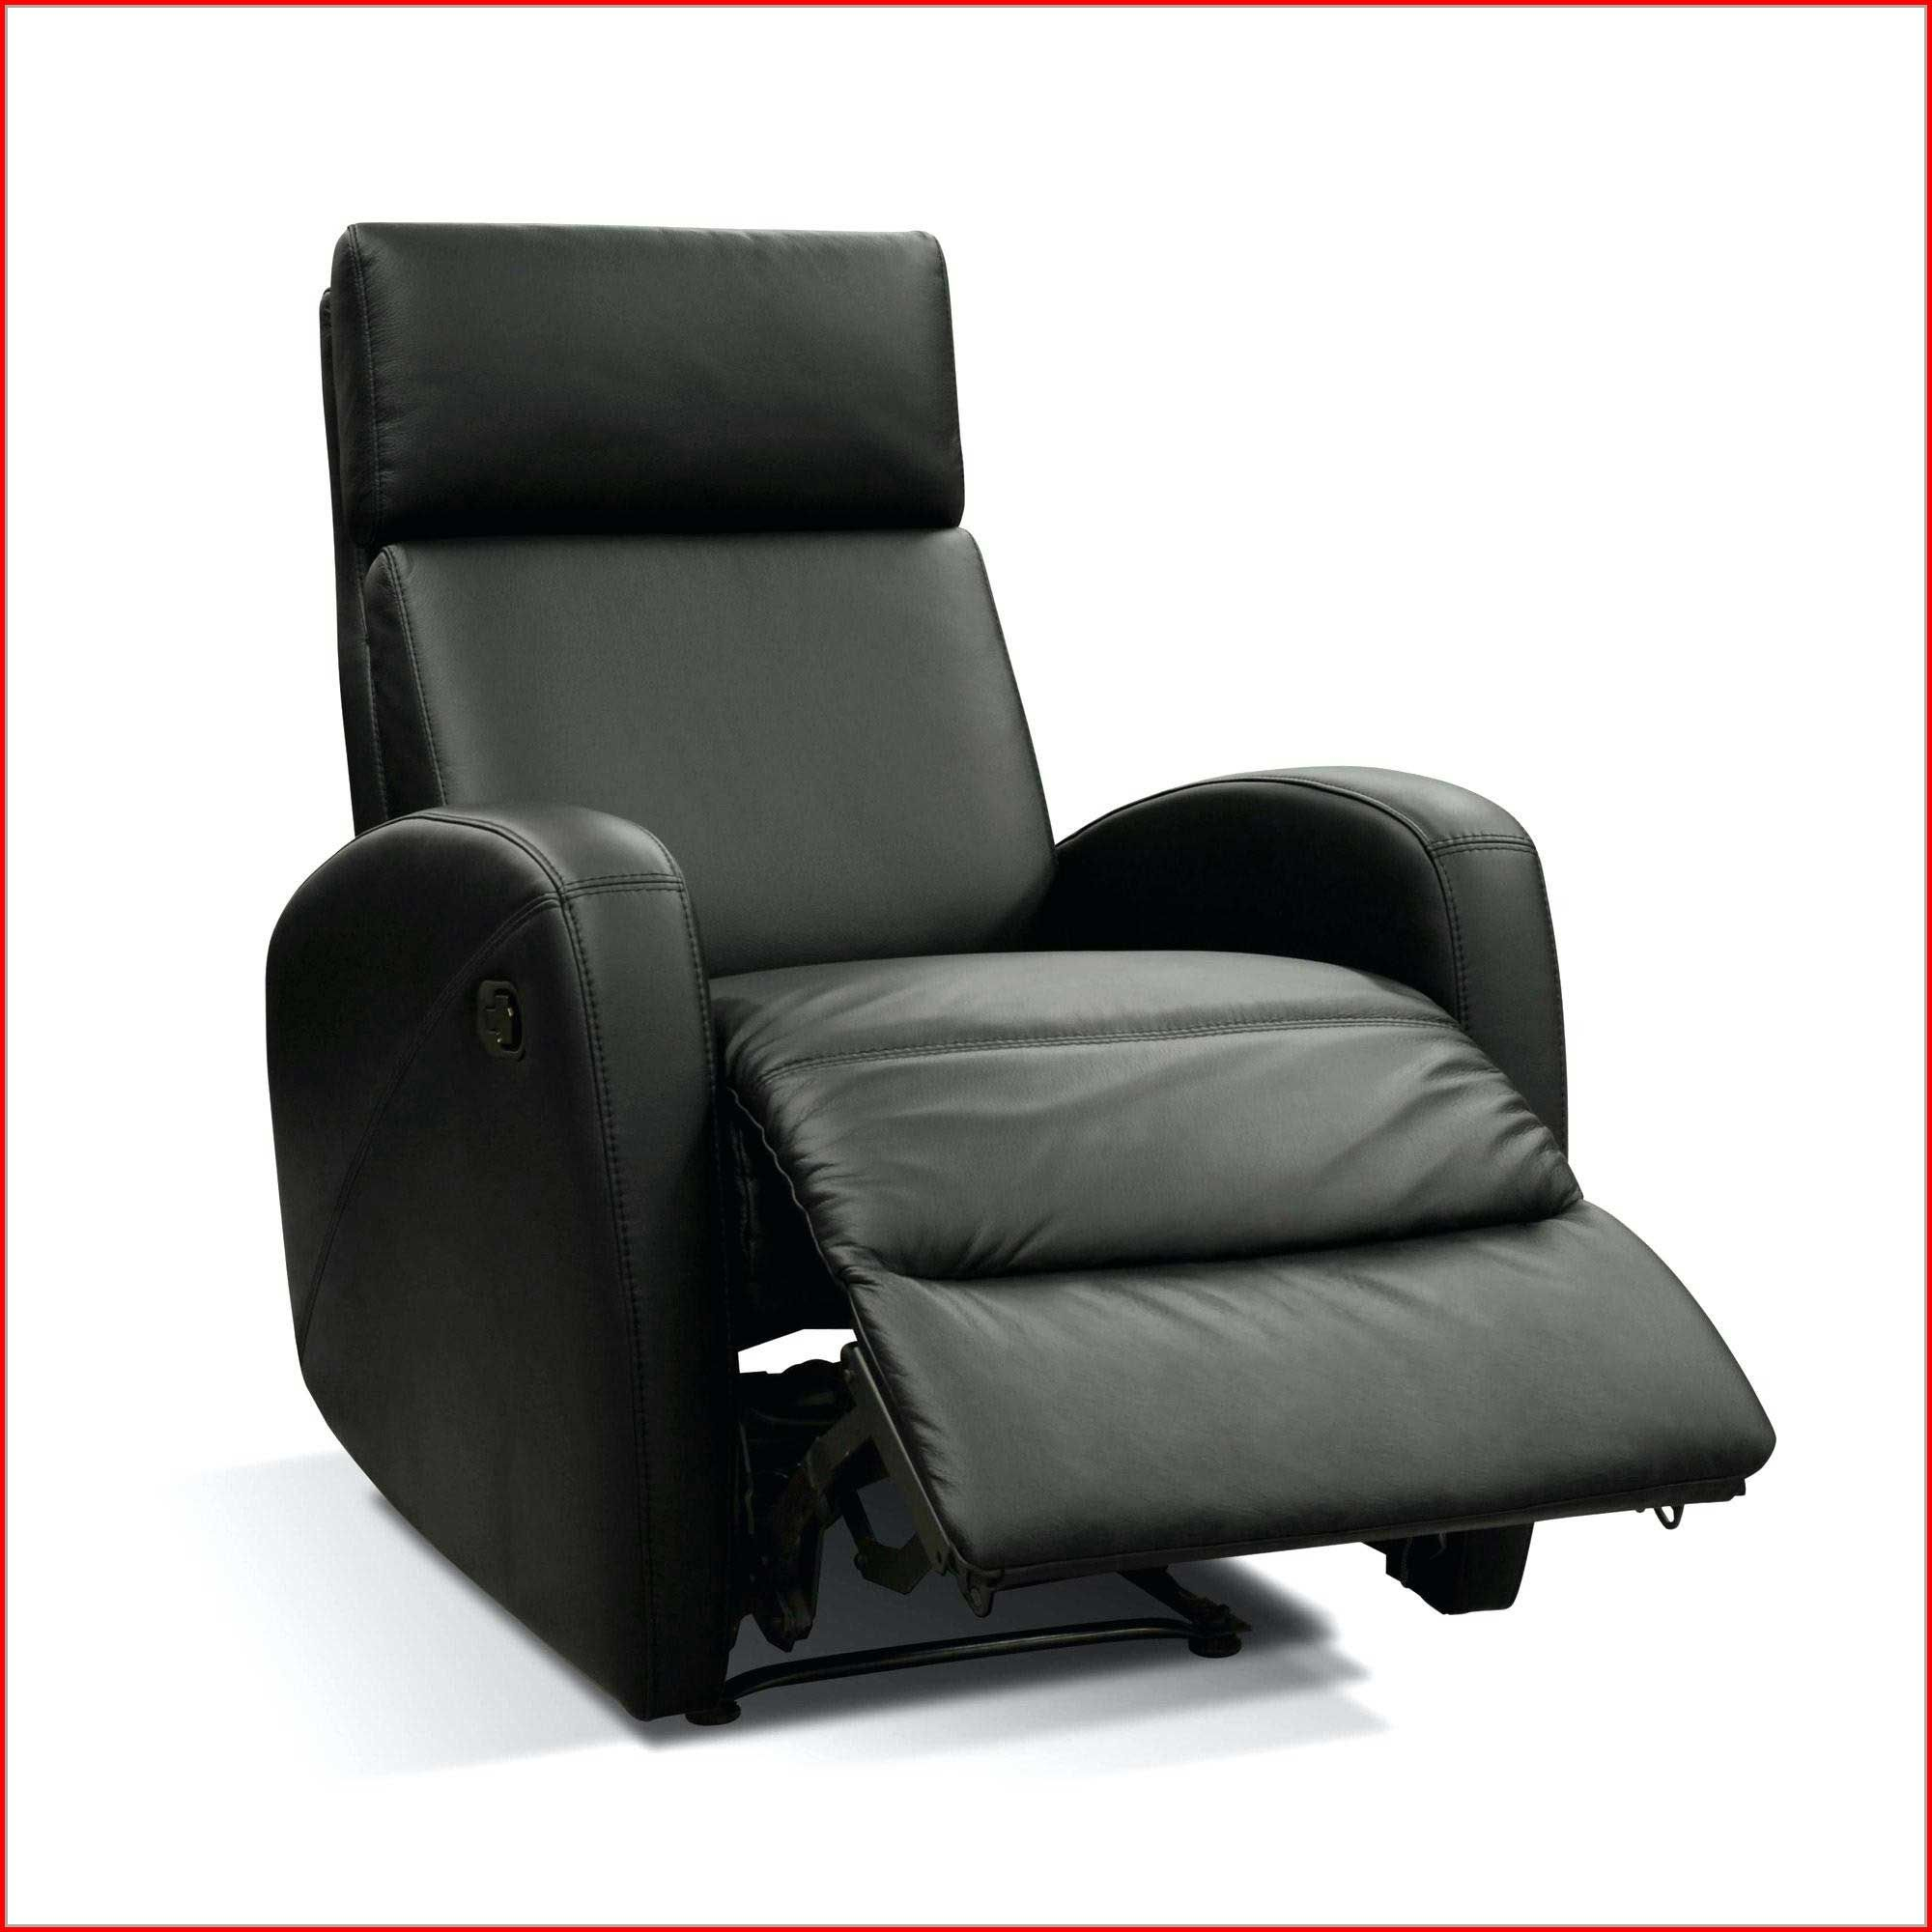 Fauteuil Relax Conforama 502782 Fauteuil Relax Manuel ... destiné Housse Pour Fauteuil Relax Conforama